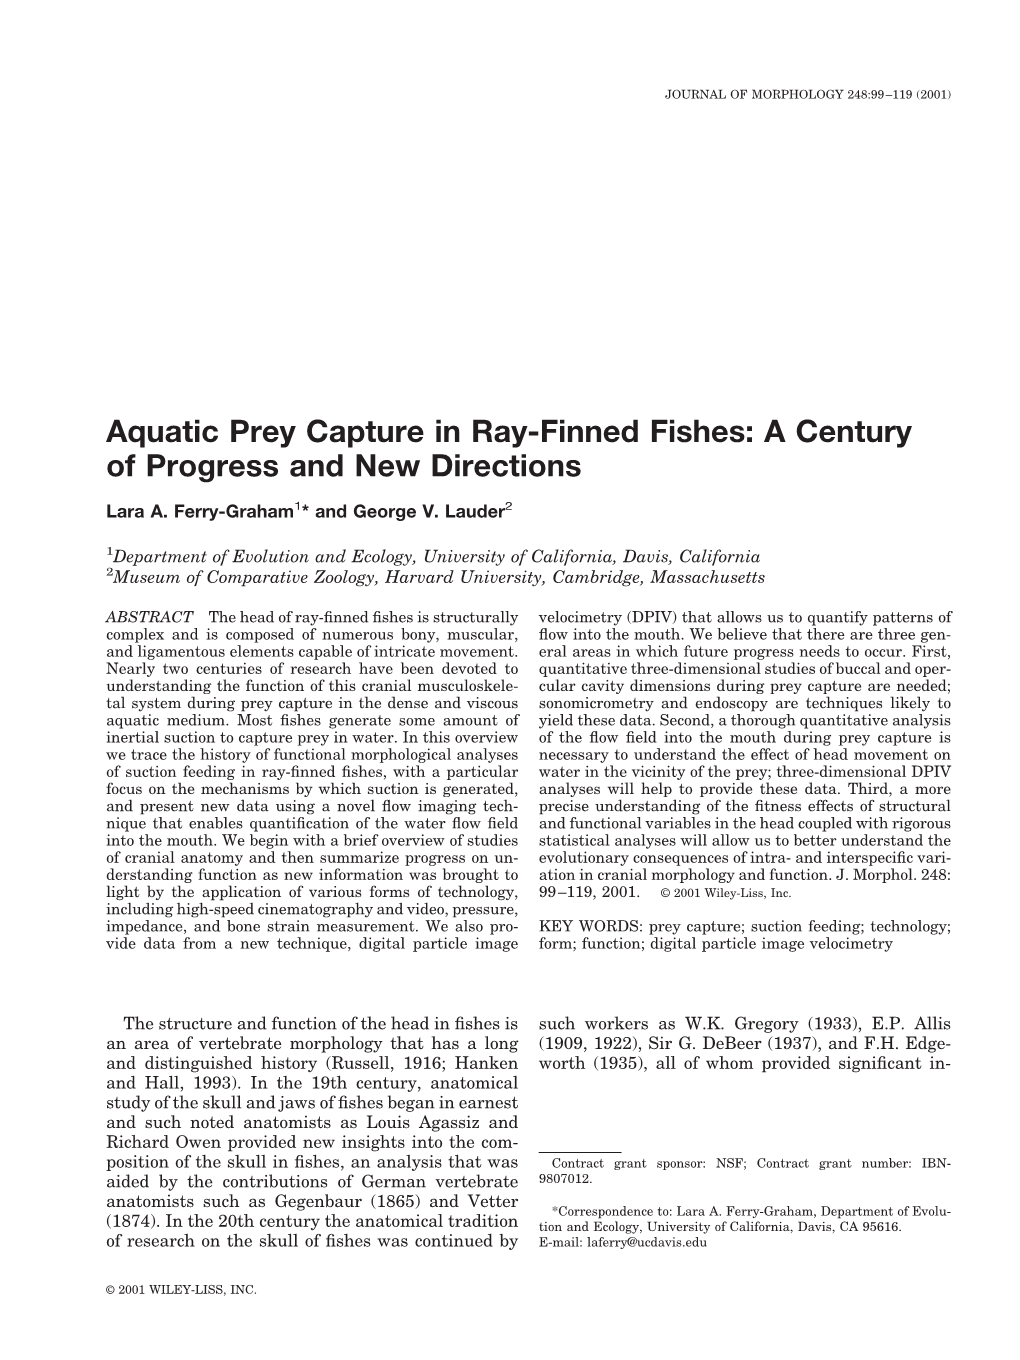 Aquatic Prey Capture in Ray-Finned Fishes: a Century of Progress and New Directions